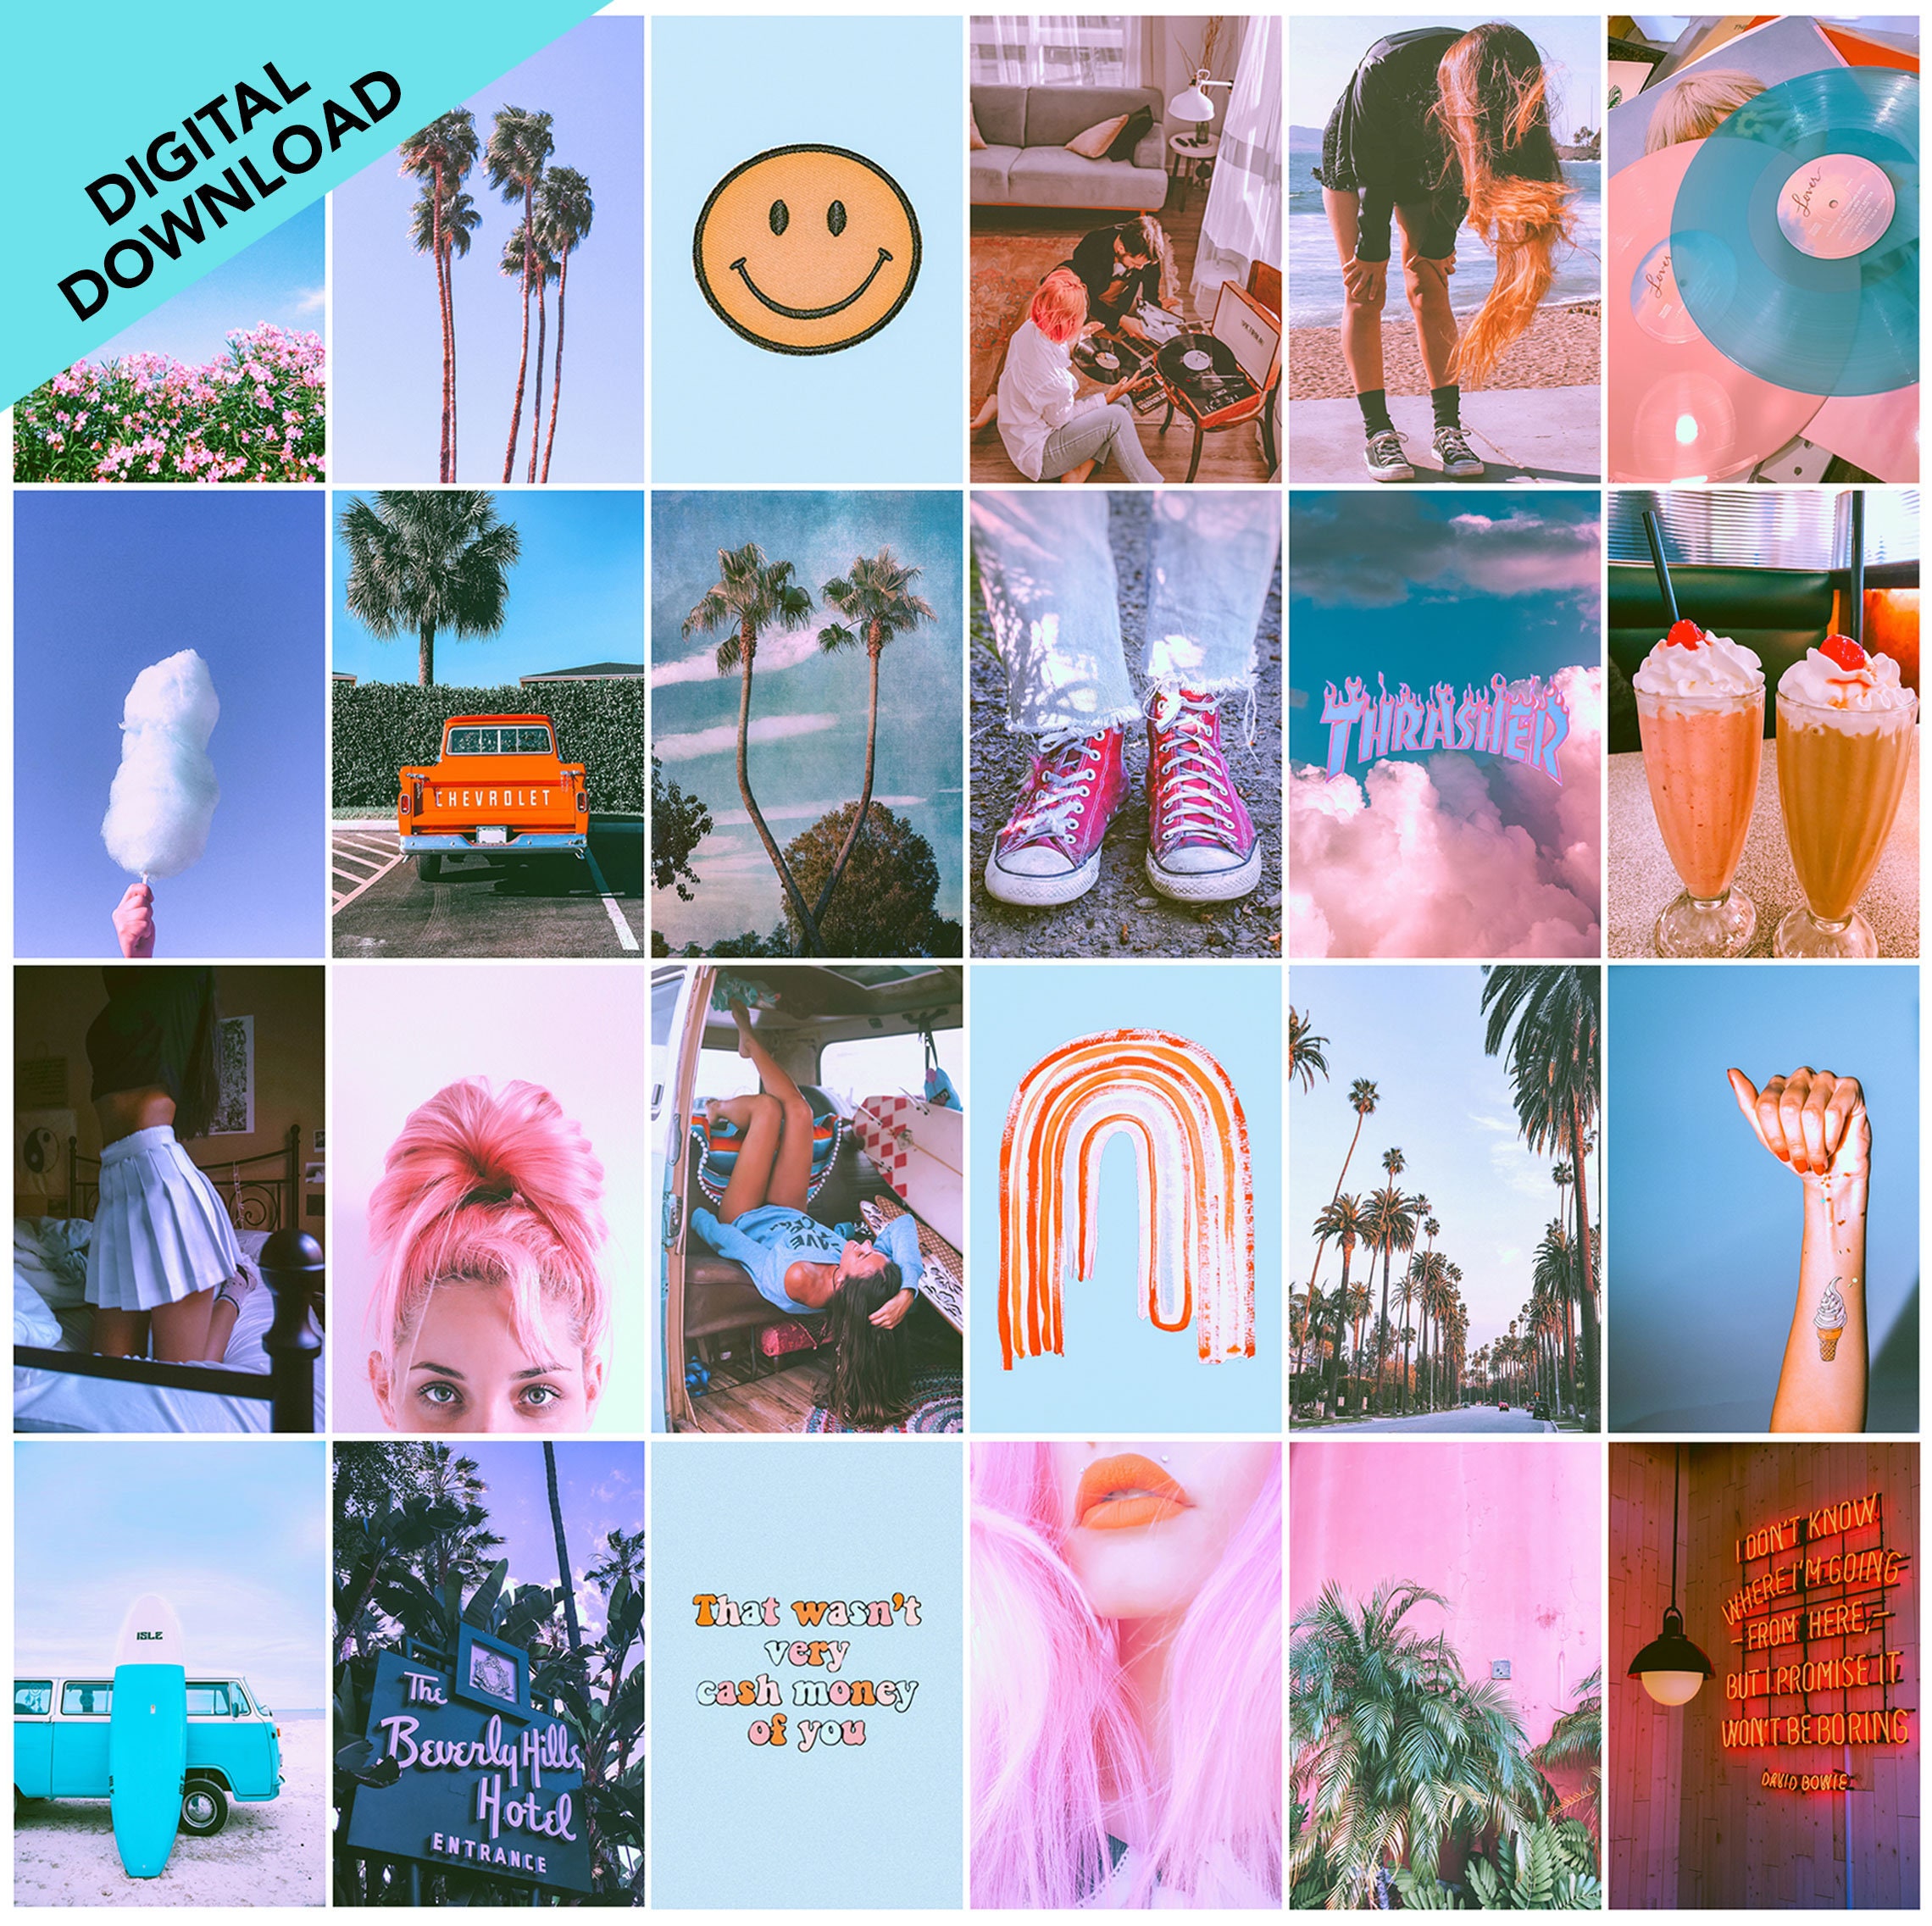 Teen Retro Vintage VSCO Wall Collage Kit Photo Wall Aesthetic Prints -  College Dorm Bedroom Decor [DOWNLOAD] A5 & 6x4 Photos (50 pcs)